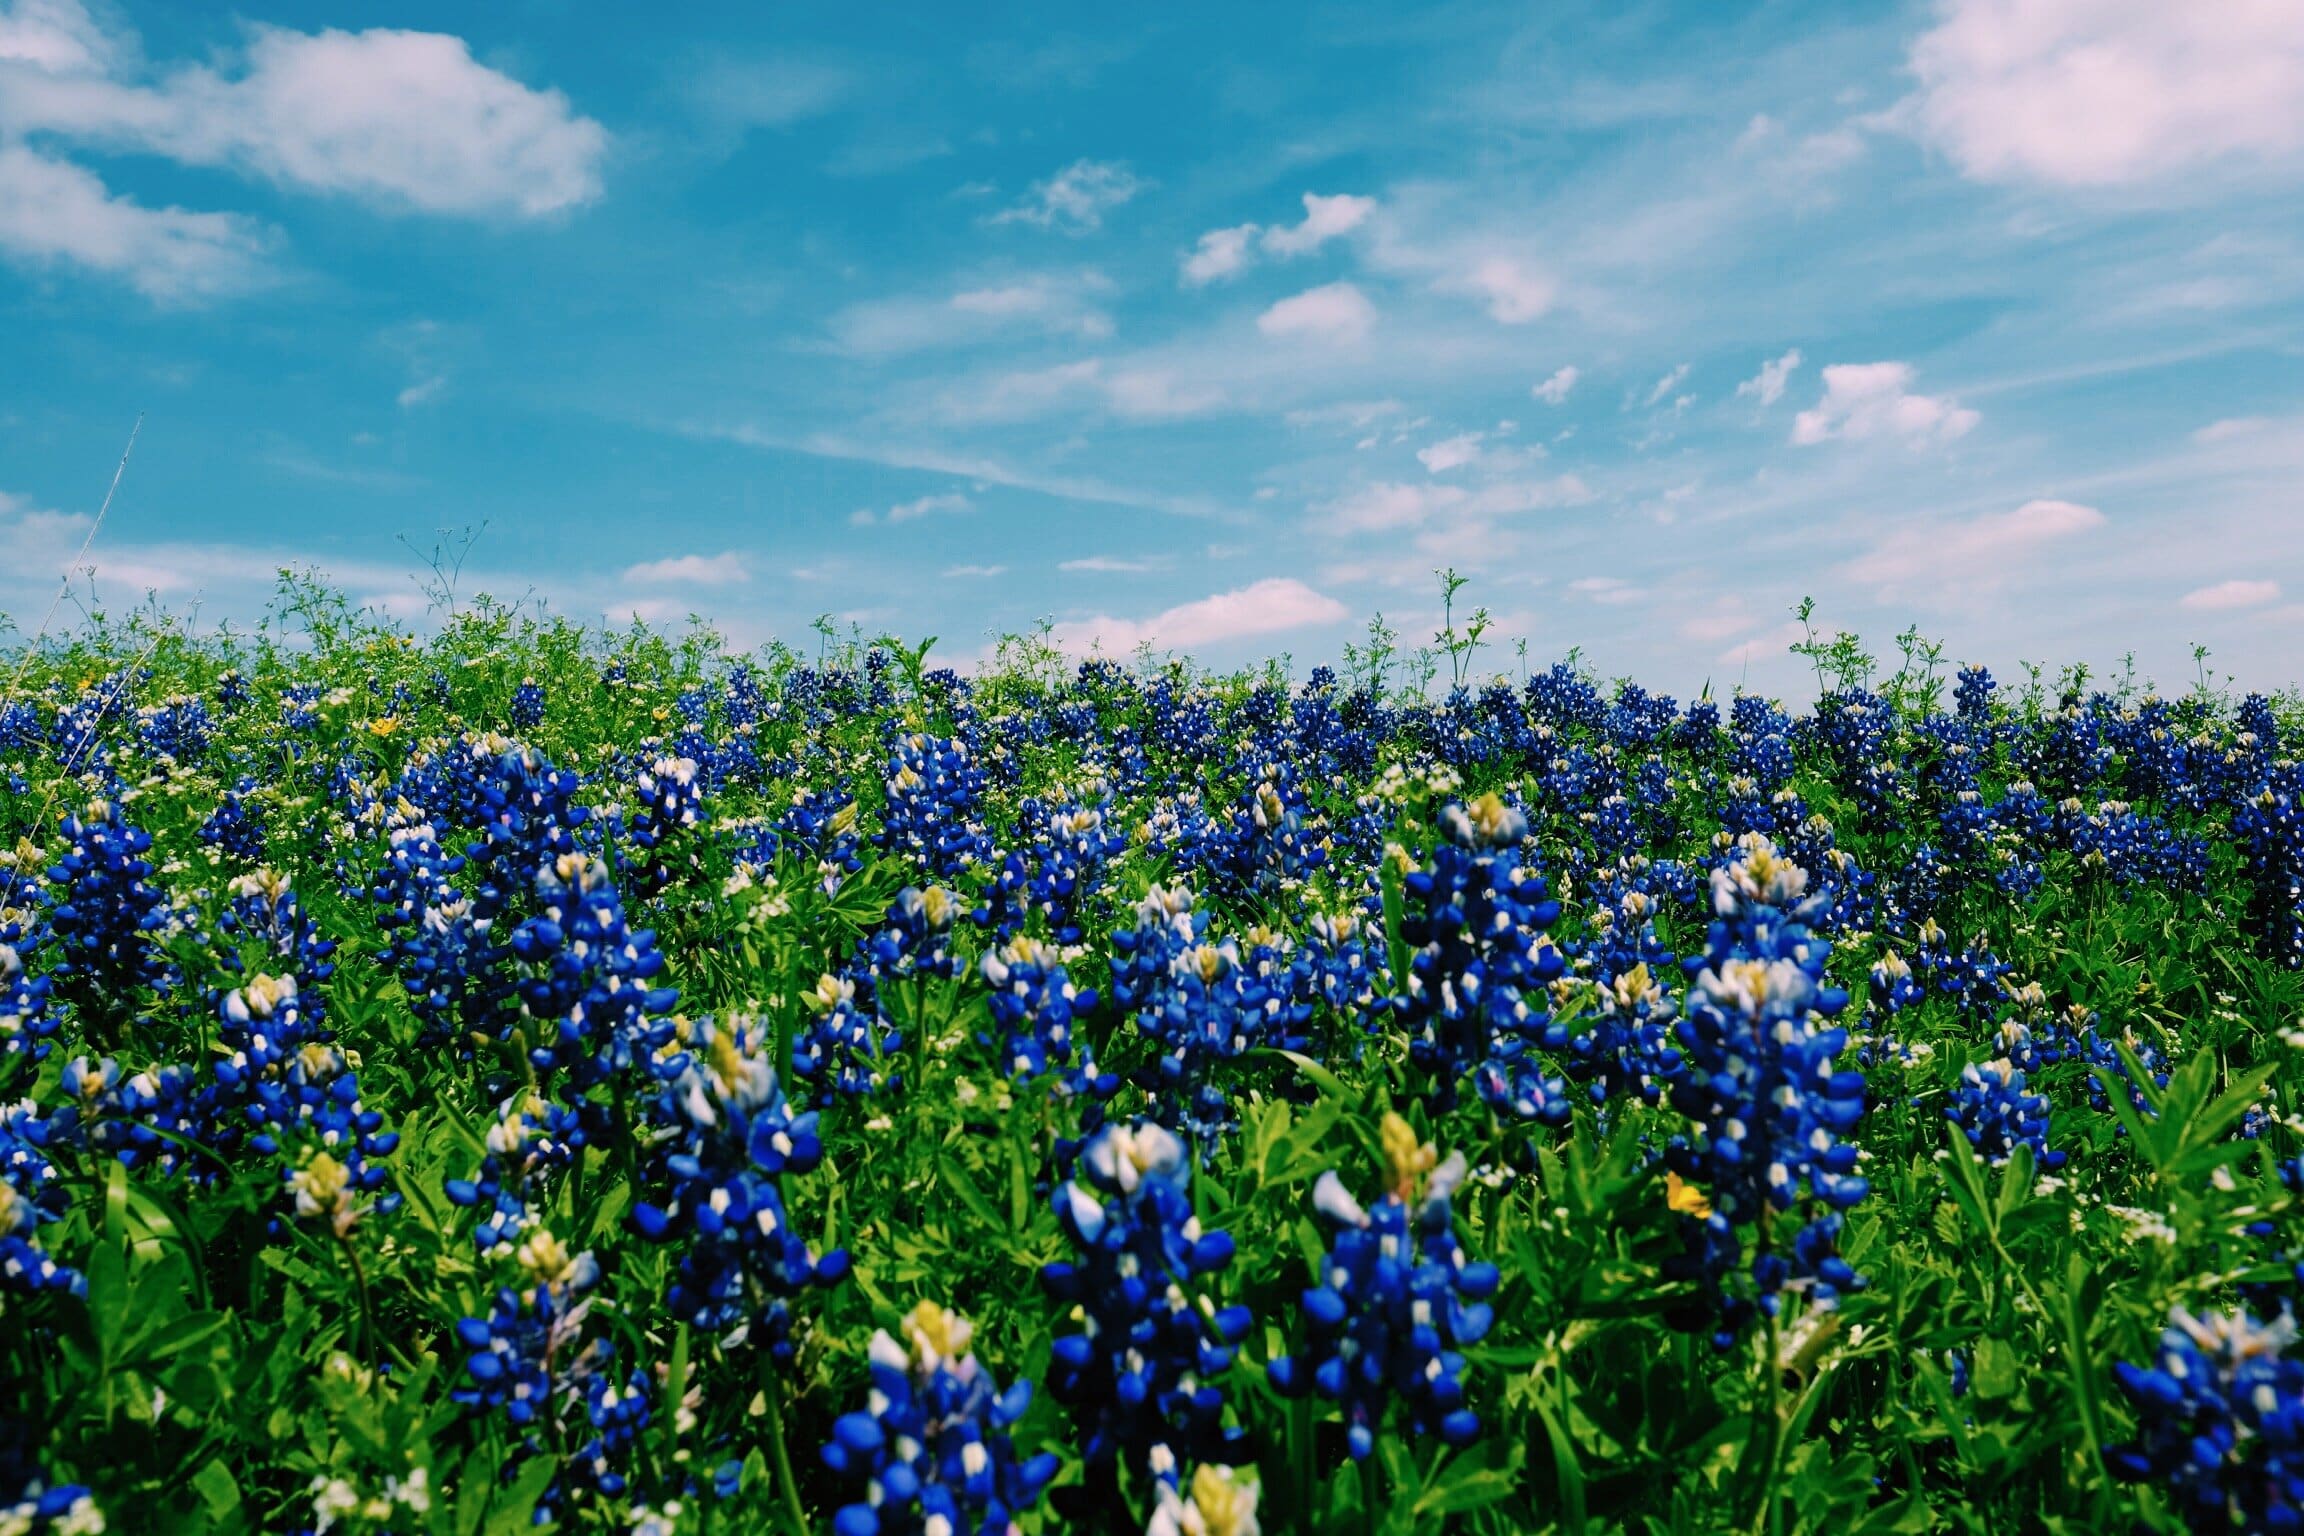 Bluebonnet season in Texas usually means individuals crossing onto fields or roadsides where they may be trespassing in order to take pictures. Know your rights as a landowner if these sightseers are injured while doing so.